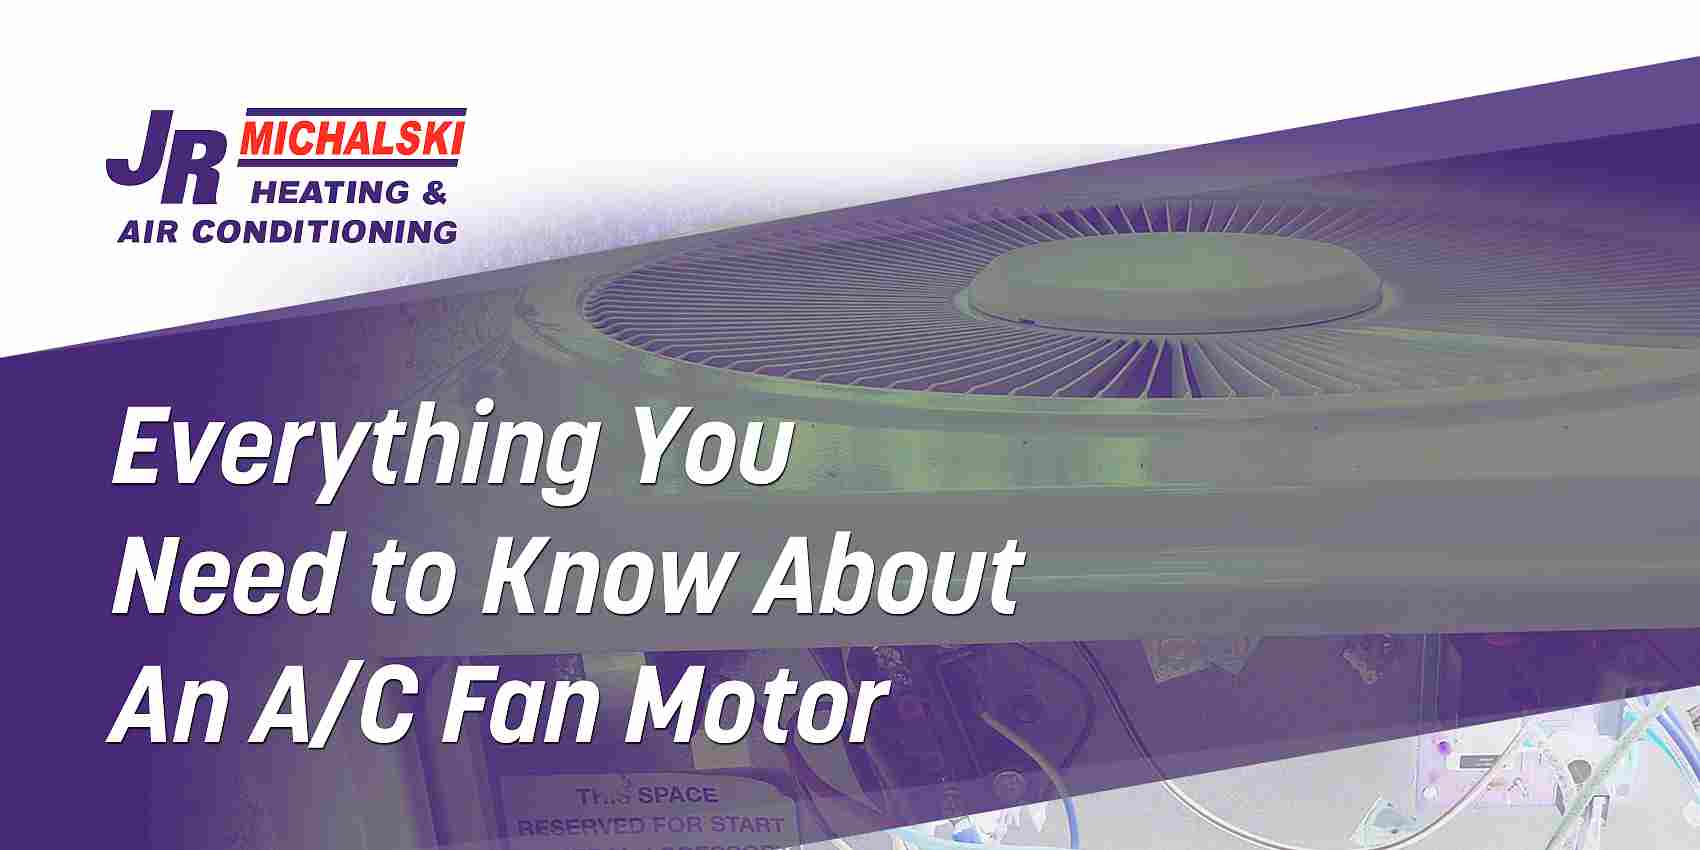 Everything You Need to Know About An A/C Fan Motor